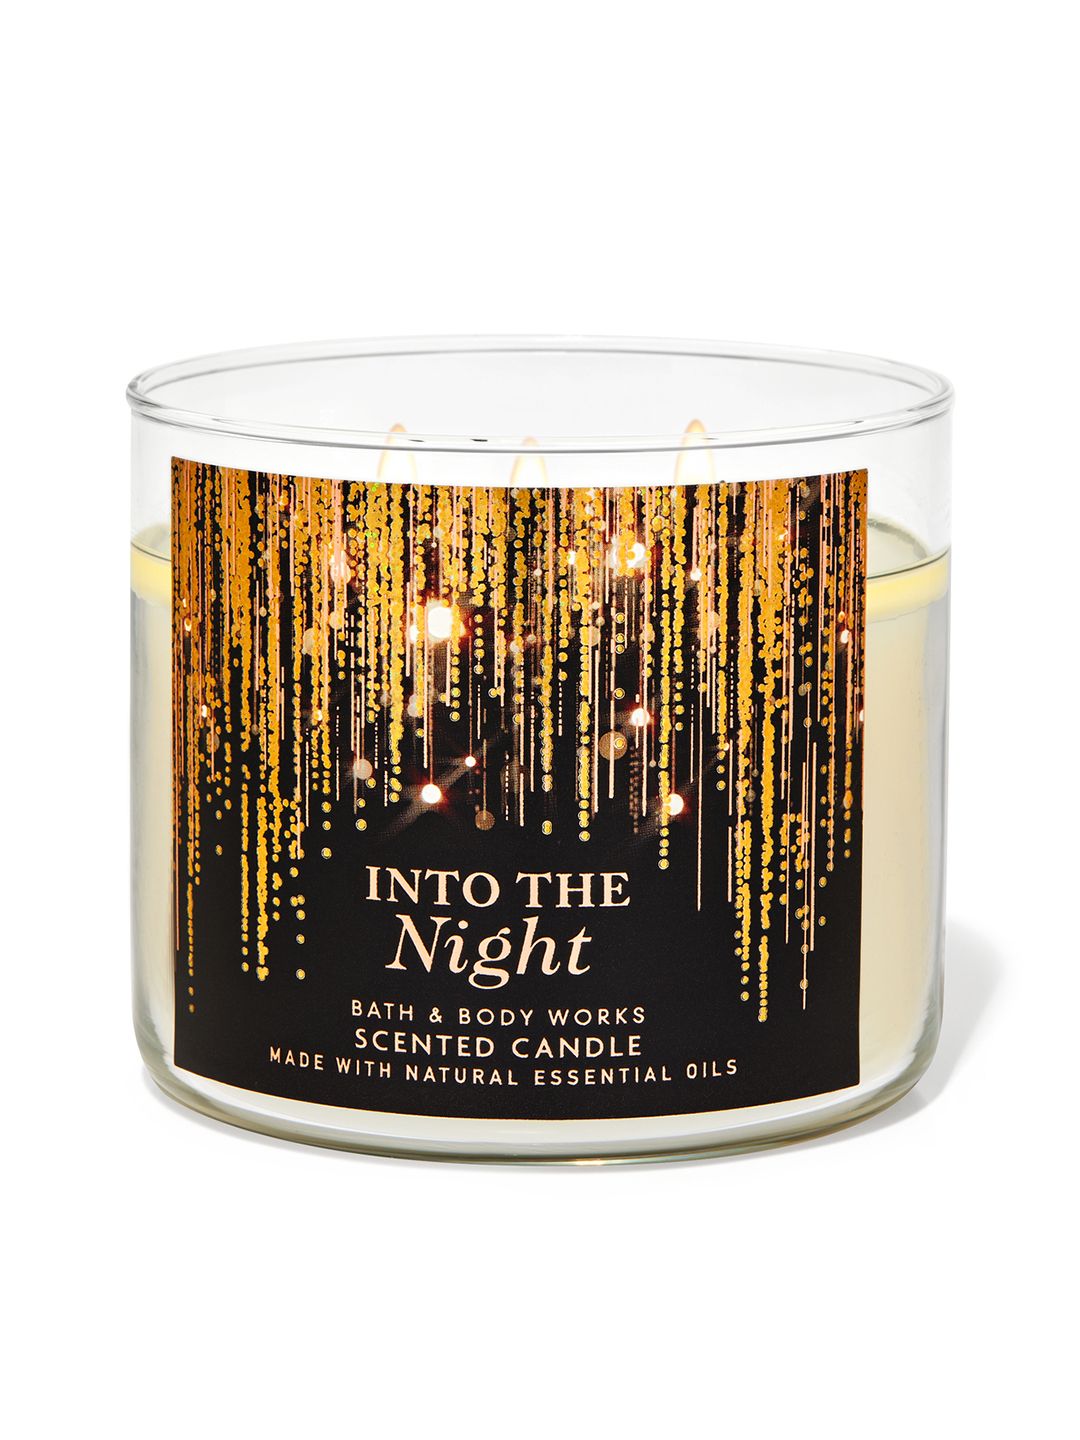 Bath & Body Works Into the Night 3-Wick Scented Candle - 411g Price in India